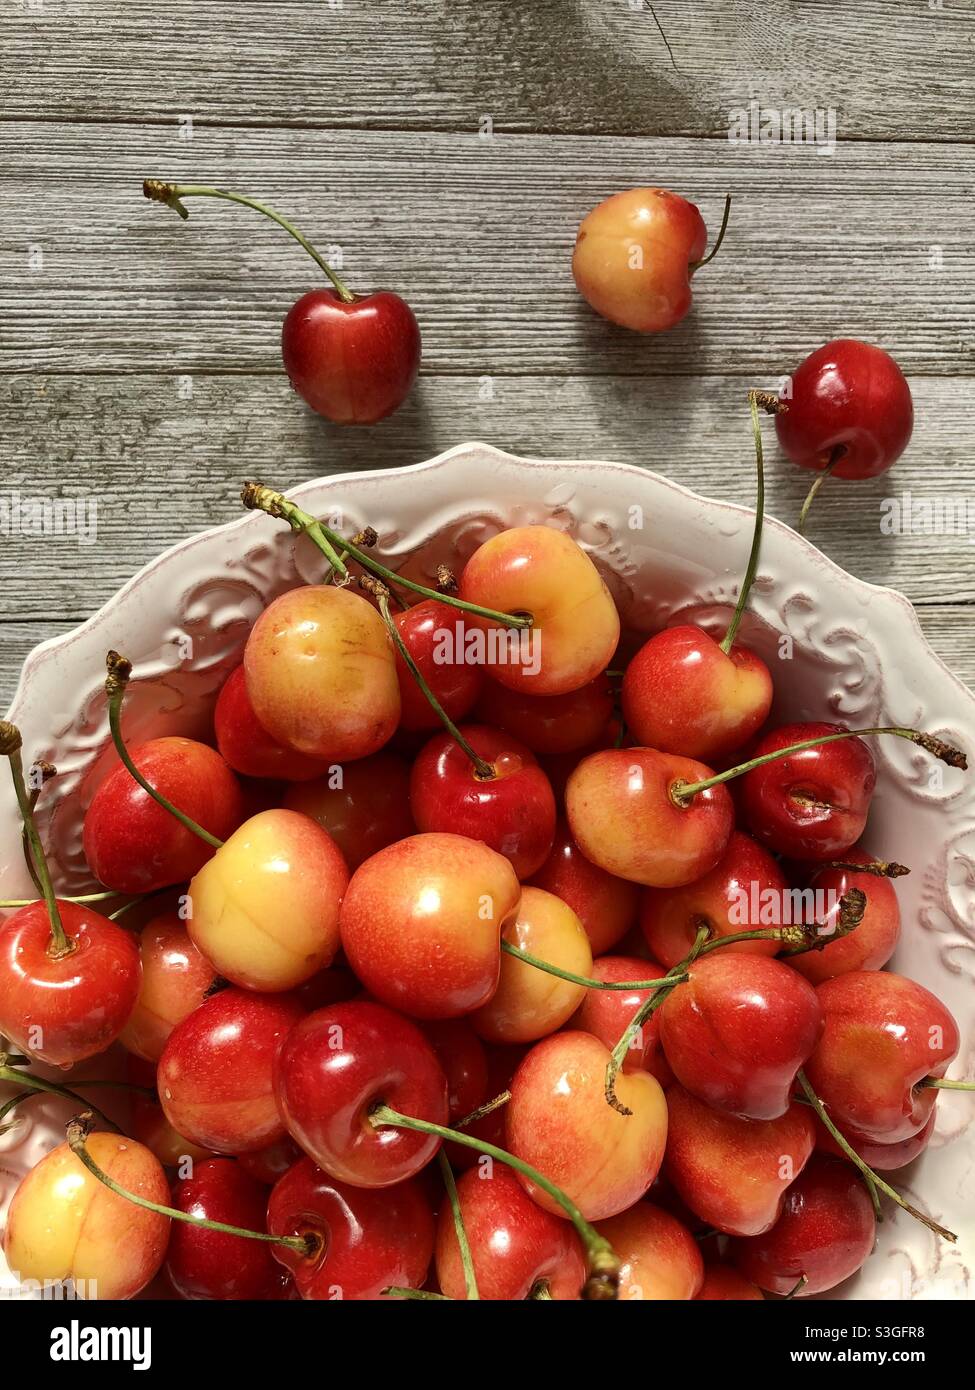 Top view of a bowl of colorful rainier cherries Stock Photo